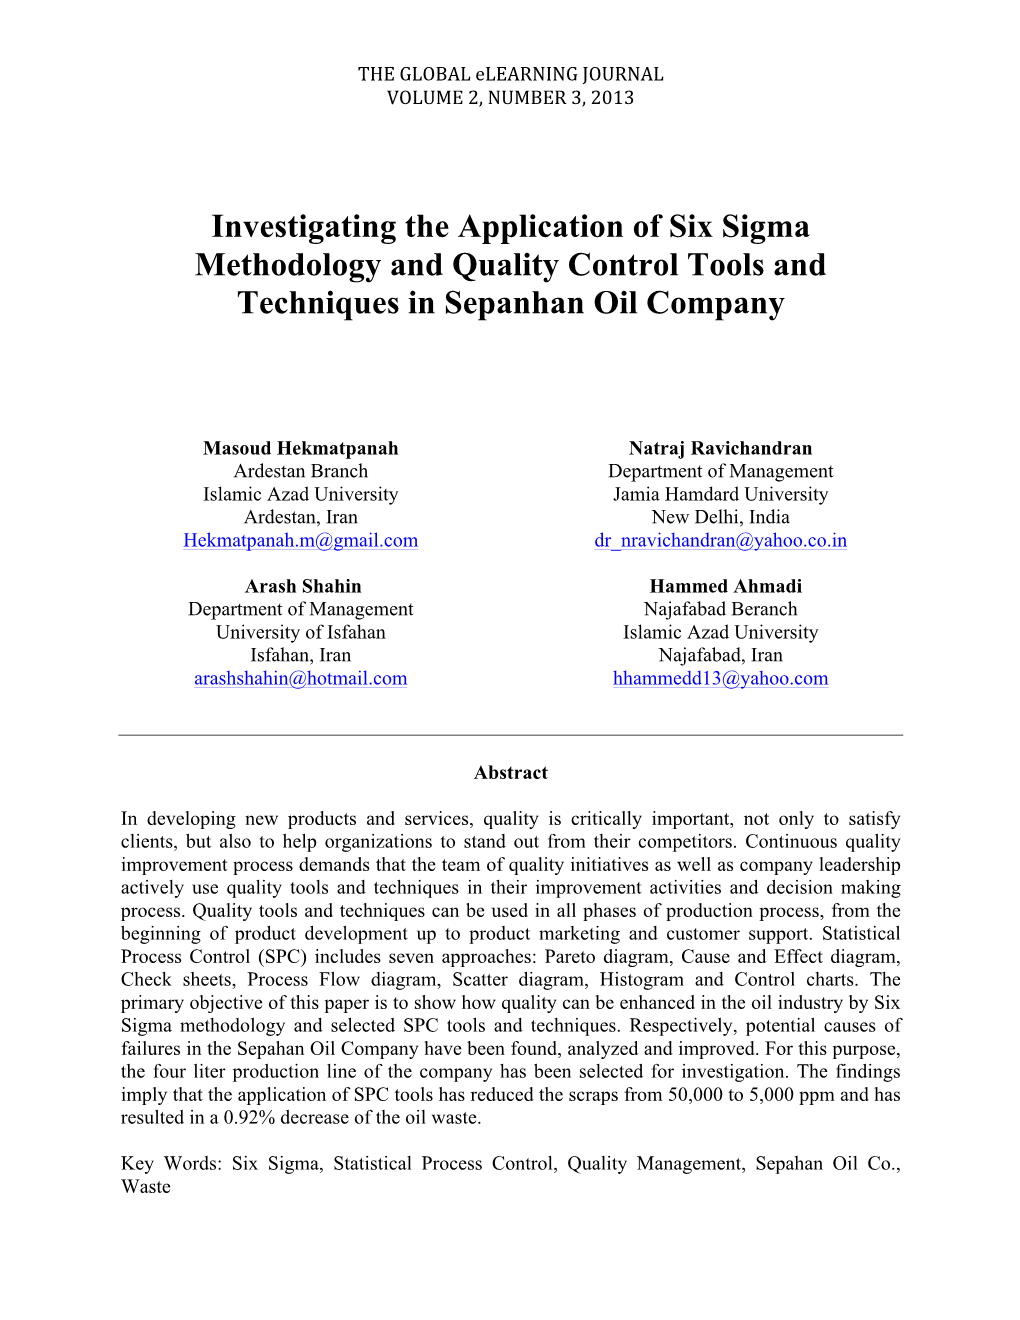 Investigating the Application of Six Sigma Methodology and Quality Control Tools and Techniques in Sepanhan Oil Company